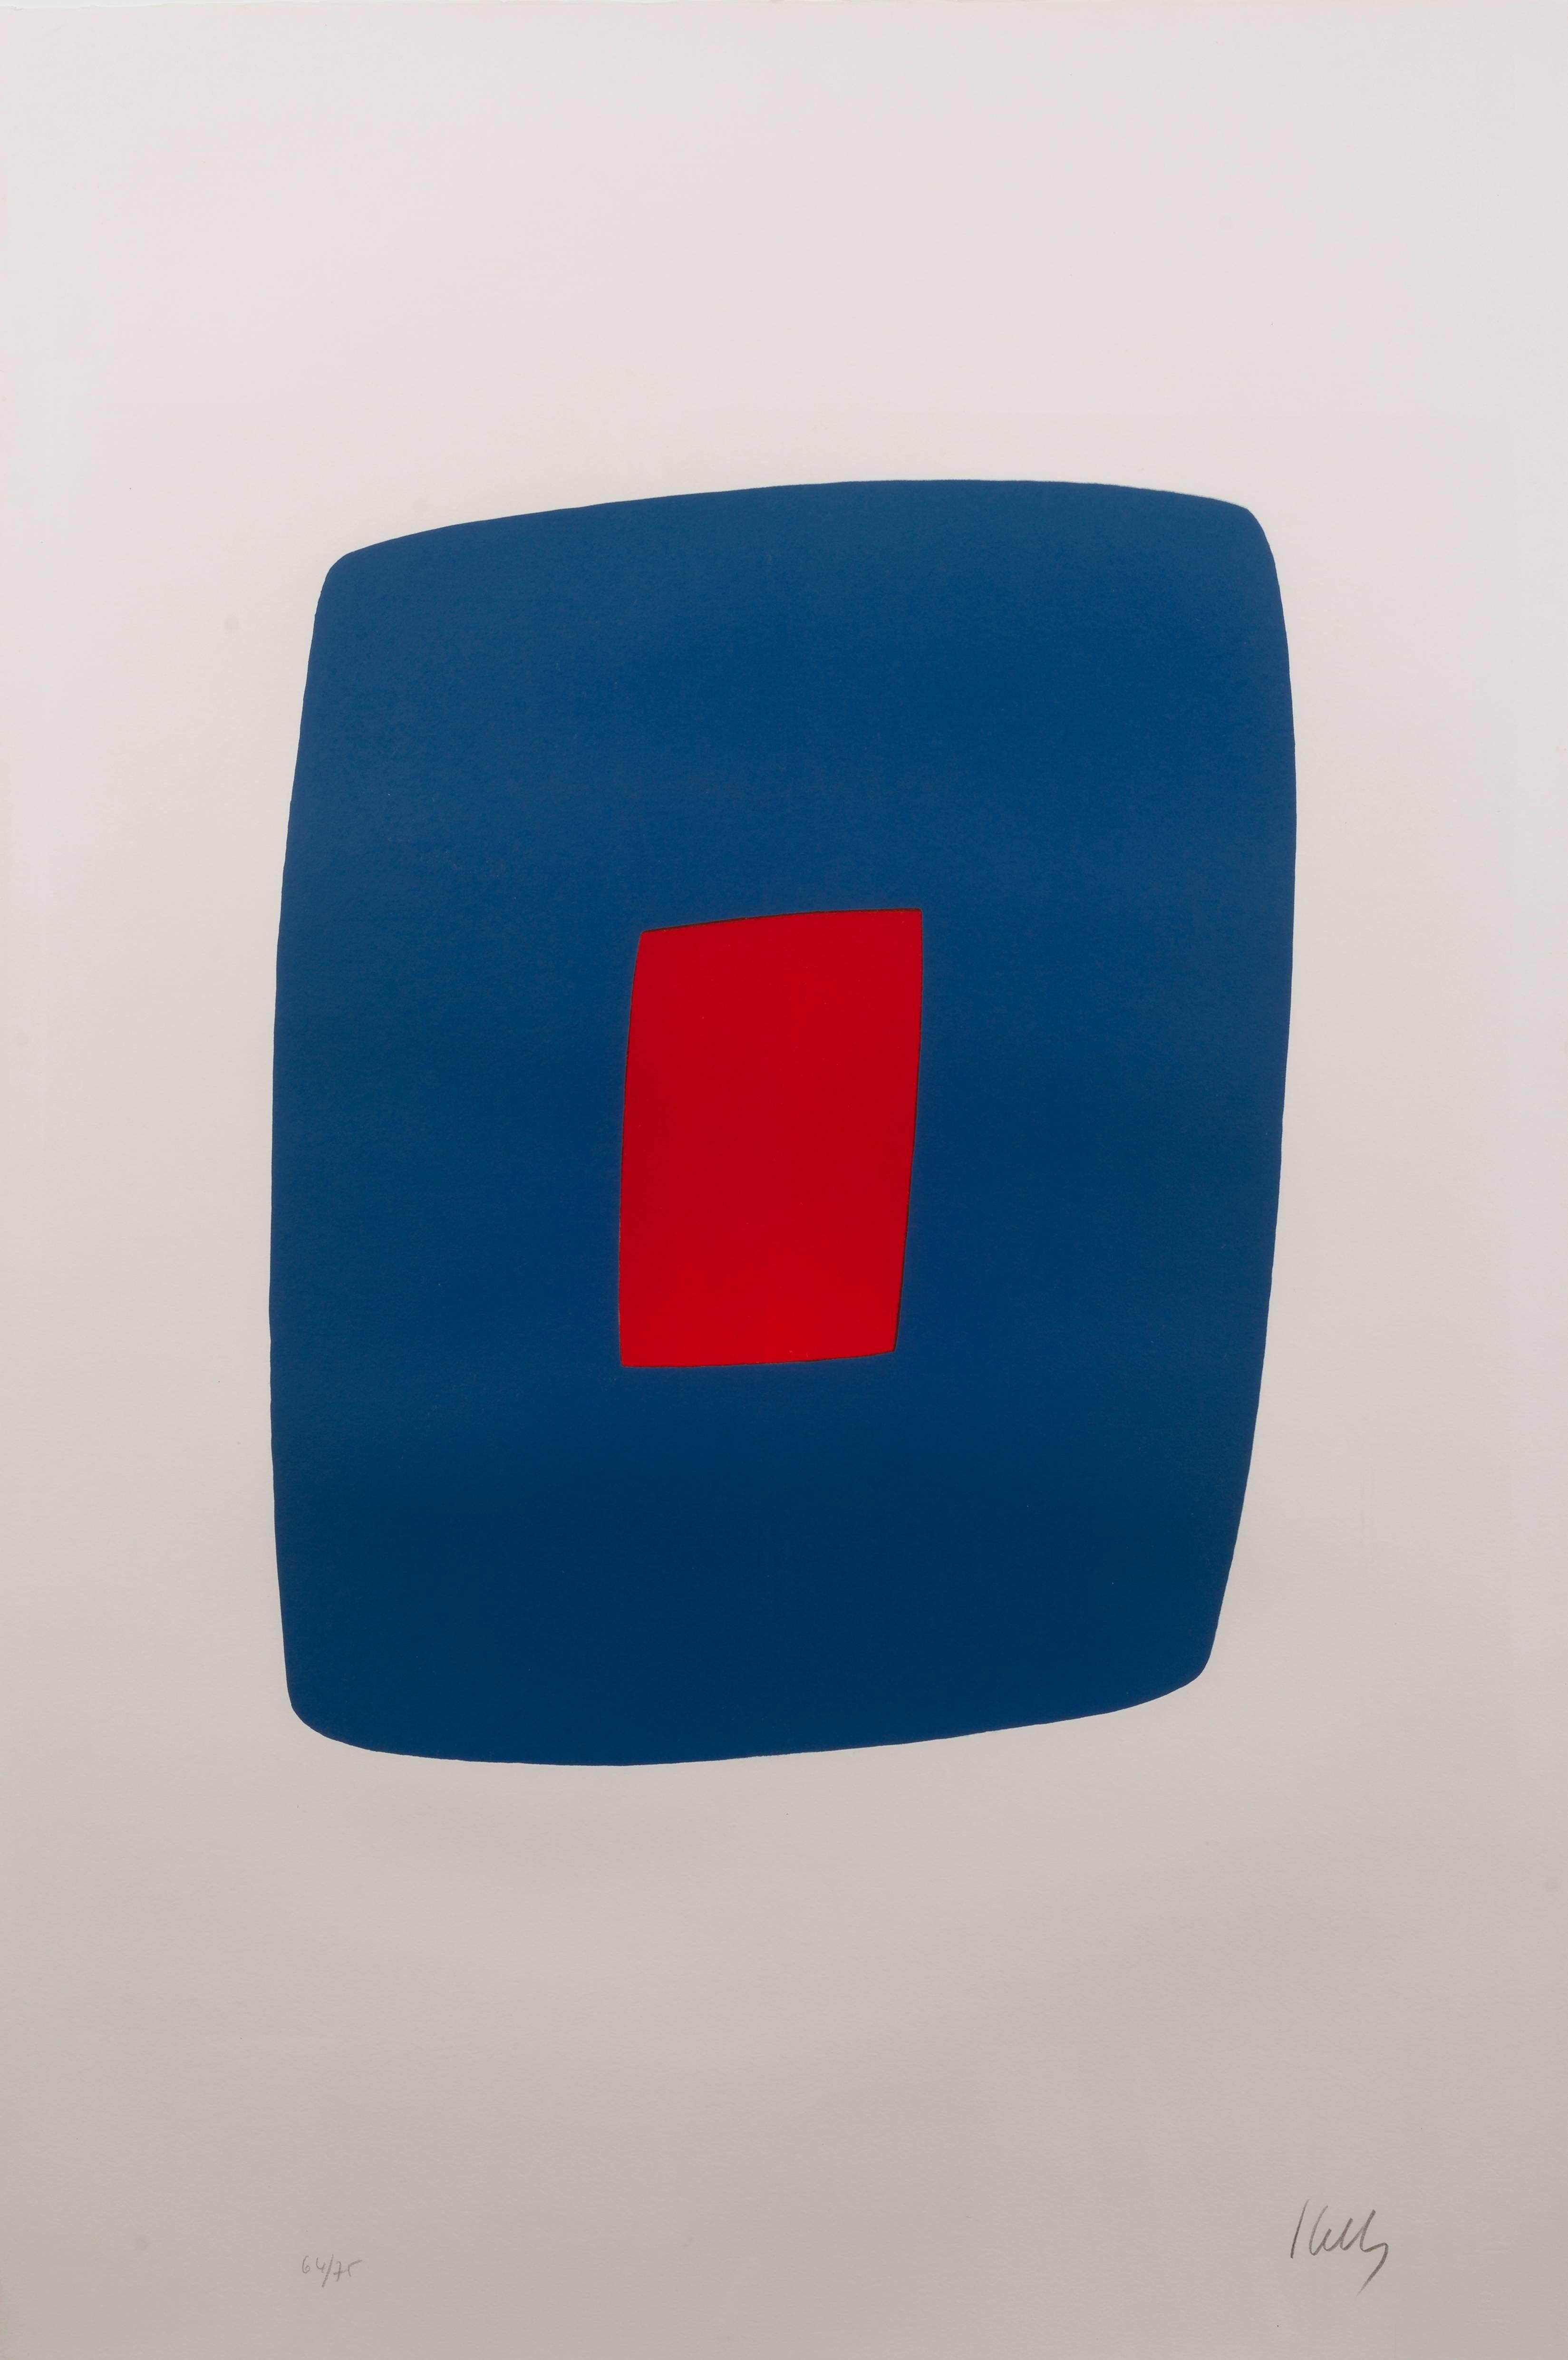 Ellsworth Kelly Abstract Print - Dark Blue with Red